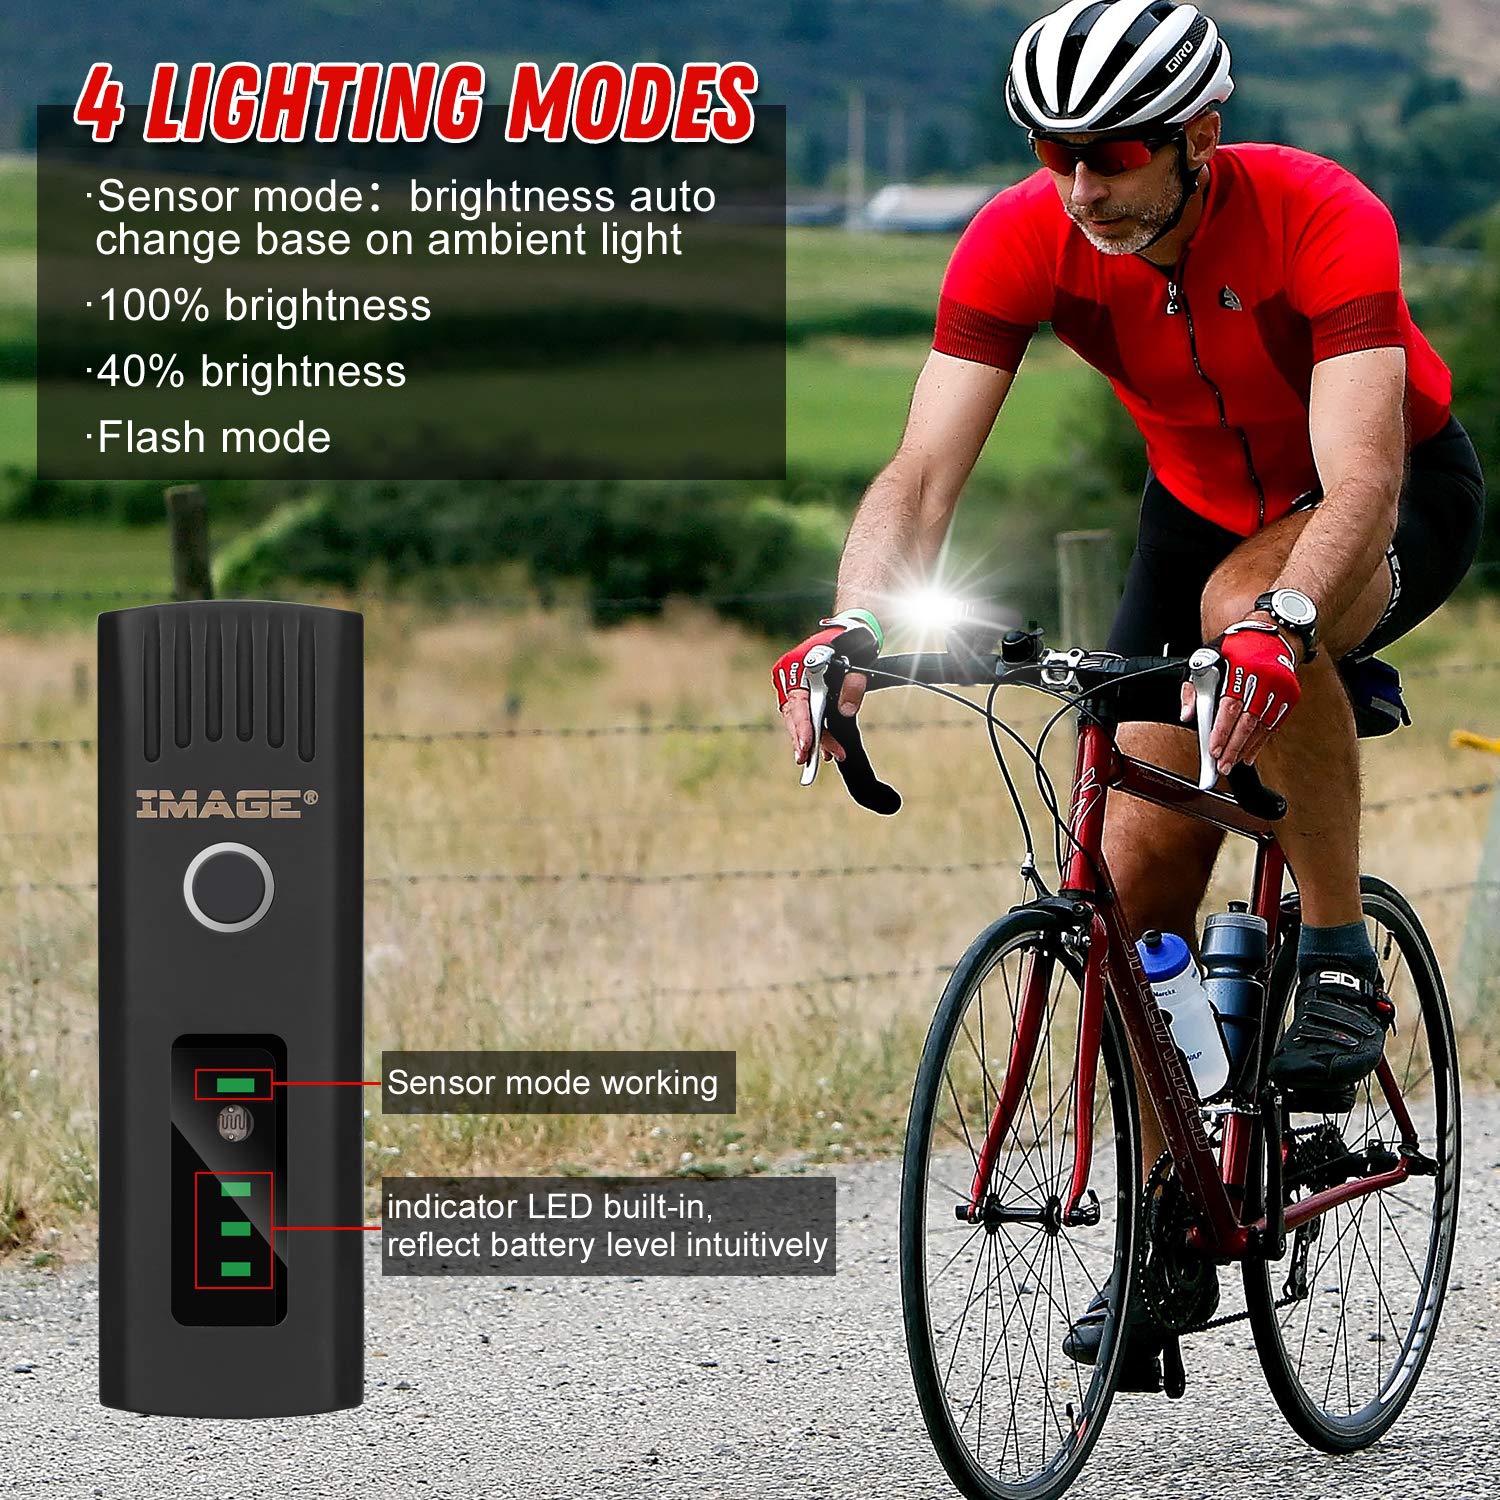 | 2 USB Cables Zapa Rechargeable LED Bike Light Set Headlight + Taillight 350lm Water Resistant Includes Front and Rear Bicycle Lights 4 Light Modes IPX4 Amazing Gift